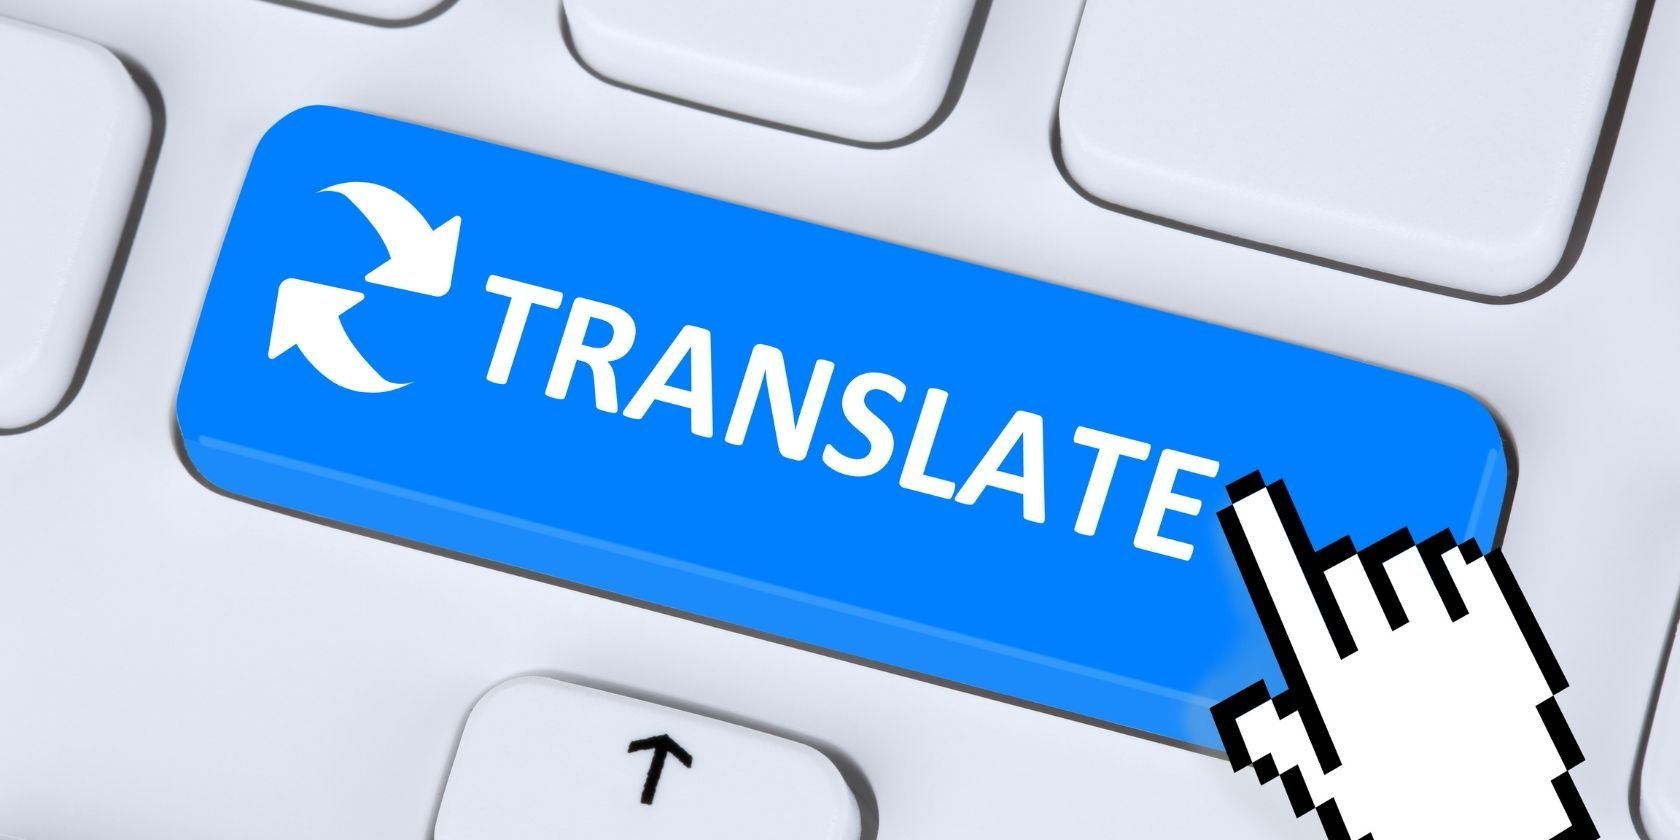 pay a visit translate in english